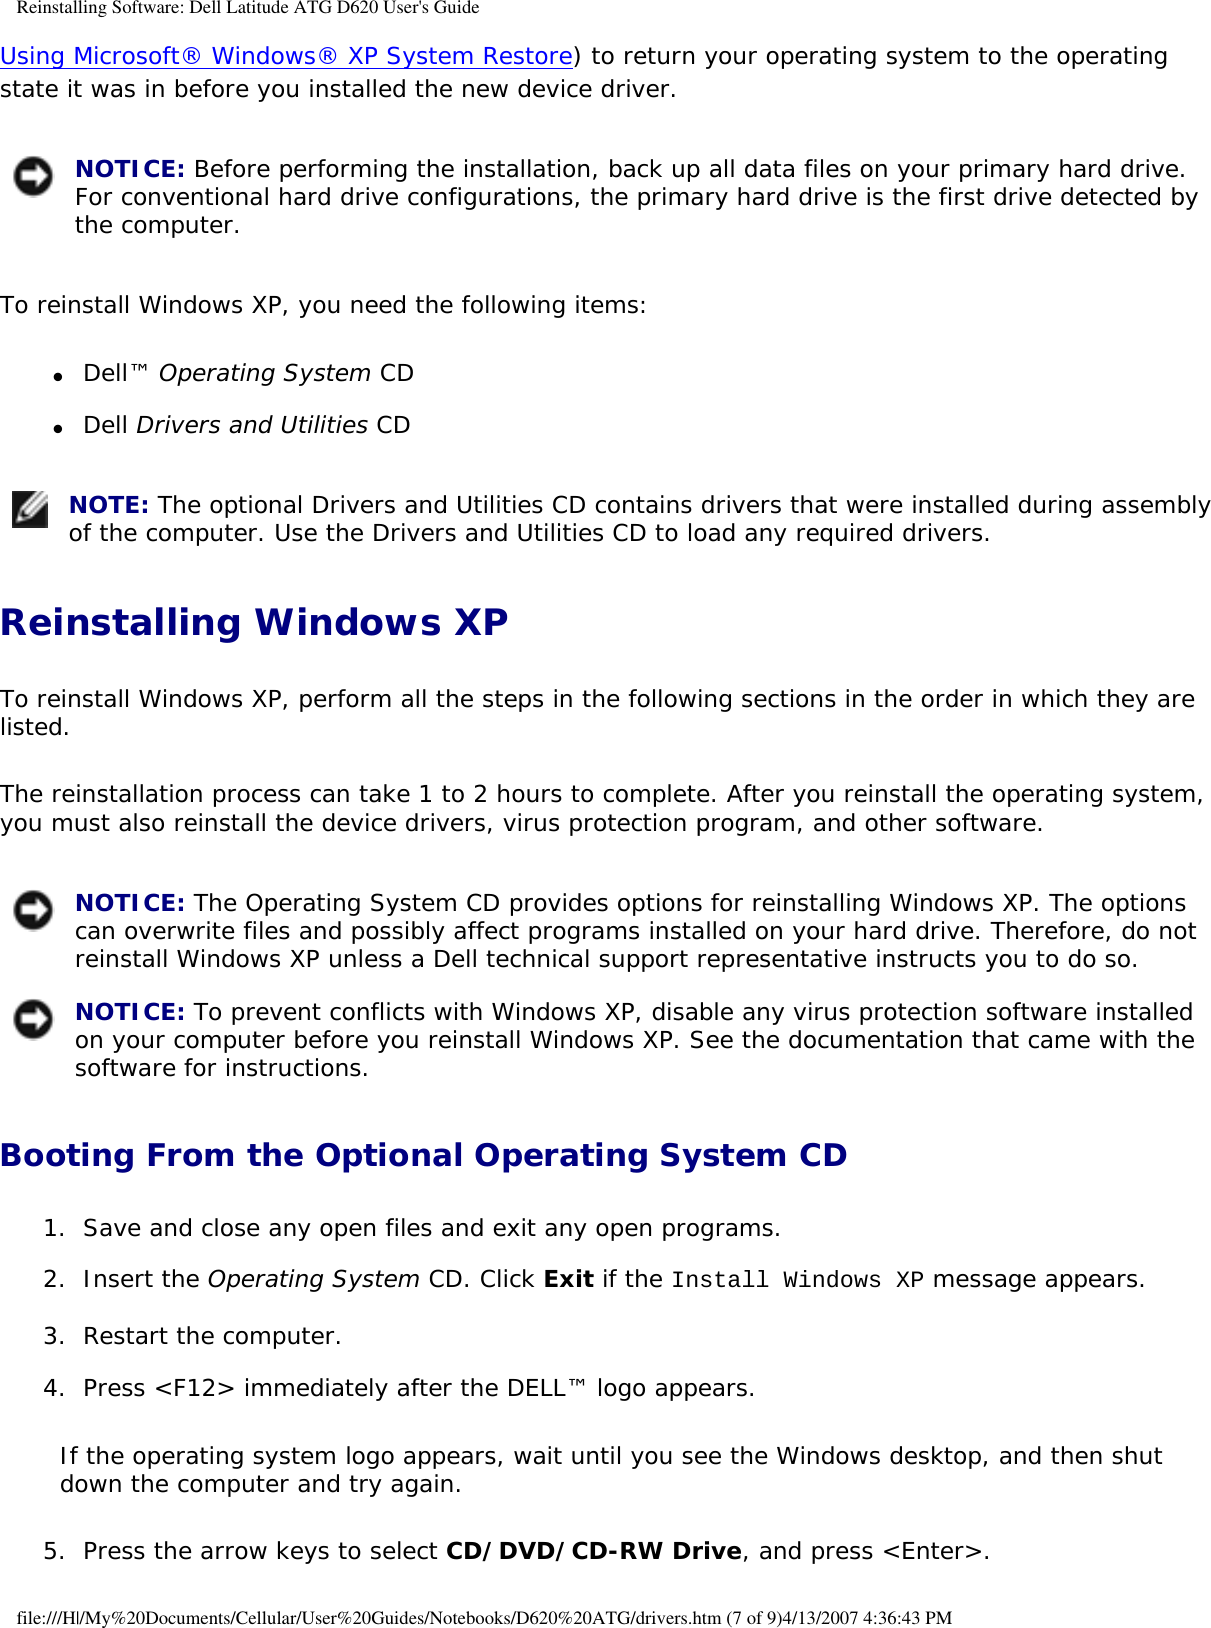 Reinstalling Software: Dell Latitude ATG D620 User&apos;s GuideUsing Microsoft® Windows® XP System Restore) to return your operating system to the operating state it was in before you installed the new device driver. NOTICE: Before performing the installation, back up all data files on your primary hard drive. For conventional hard drive configurations, the primary hard drive is the first drive detected by the computer. To reinstall Windows XP, you need the following items:●     Dell™ Operating System CD  ●     Dell Drivers and Utilities CD   NOTE: The optional Drivers and Utilities CD contains drivers that were installed during assembly of the computer. Use the Drivers and Utilities CD to load any required drivers. Reinstalling Windows XPTo reinstall Windows XP, perform all the steps in the following sections in the order in which they are listed.The reinstallation process can take 1 to 2 hours to complete. After you reinstall the operating system, you must also reinstall the device drivers, virus protection program, and other software. NOTICE: The Operating System CD provides options for reinstalling Windows XP. The options can overwrite files and possibly affect programs installed on your hard drive. Therefore, do not reinstall Windows XP unless a Dell technical support representative instructs you to do so.  NOTICE: To prevent conflicts with Windows XP, disable any virus protection software installed on your computer before you reinstall Windows XP. See the documentation that came with the software for instructions. Booting From the Optional Operating System CD 1.  Save and close any open files and exit any open programs.   2.  Insert the Operating System CD. Click Exit if the Install Windows XP message appears.   3.  Restart the computer.   4.  Press &lt;F12&gt; immediately after the DELL™ logo appears.   If the operating system logo appears, wait until you see the Windows desktop, and then shut down the computer and try again.5.  Press the arrow keys to select CD/DVD/CD-RW Drive, and press &lt;Enter&gt;.  file:///H|/My%20Documents/Cellular/User%20Guides/Notebooks/D620%20ATG/drivers.htm (7 of 9)4/13/2007 4:36:43 PM